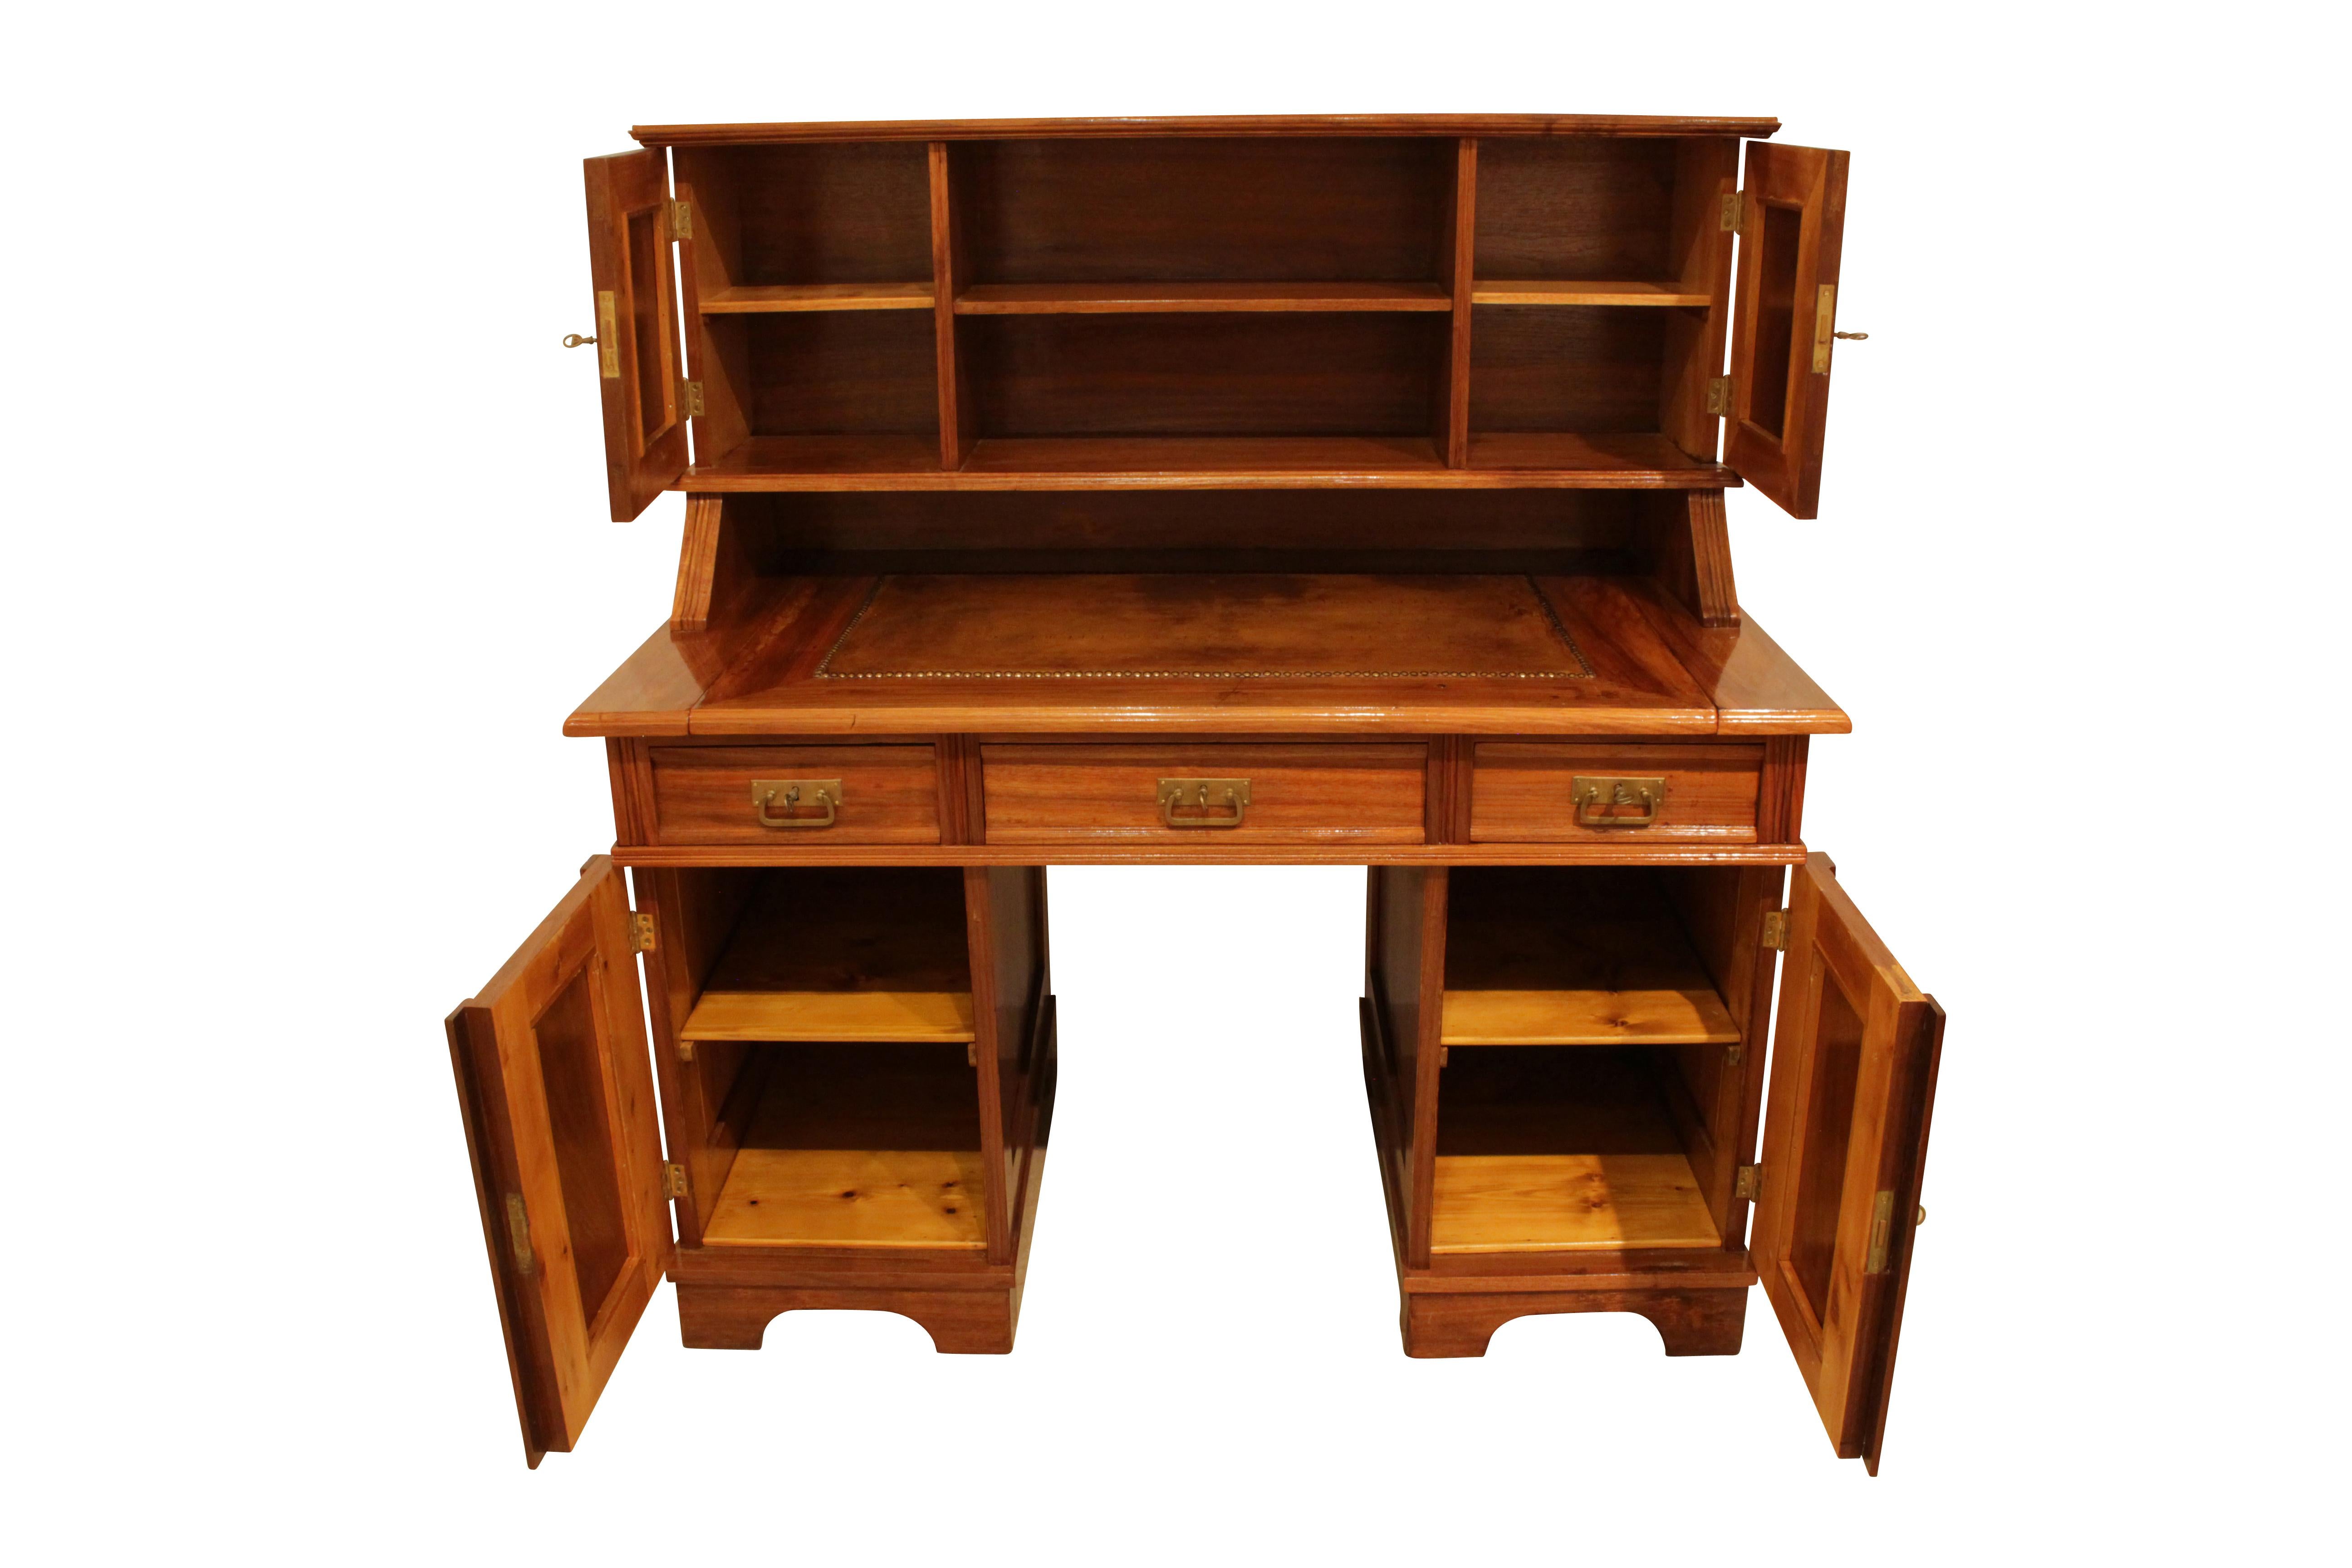 Beautiful top desk from the time of Art Nouveau from Germany. The desk was made circa 1905 of walnut wood on a pinewood body.
The writing plate was upholstered with hand-patinated leather and can be pulled out. The locks, hinges, fittings are made